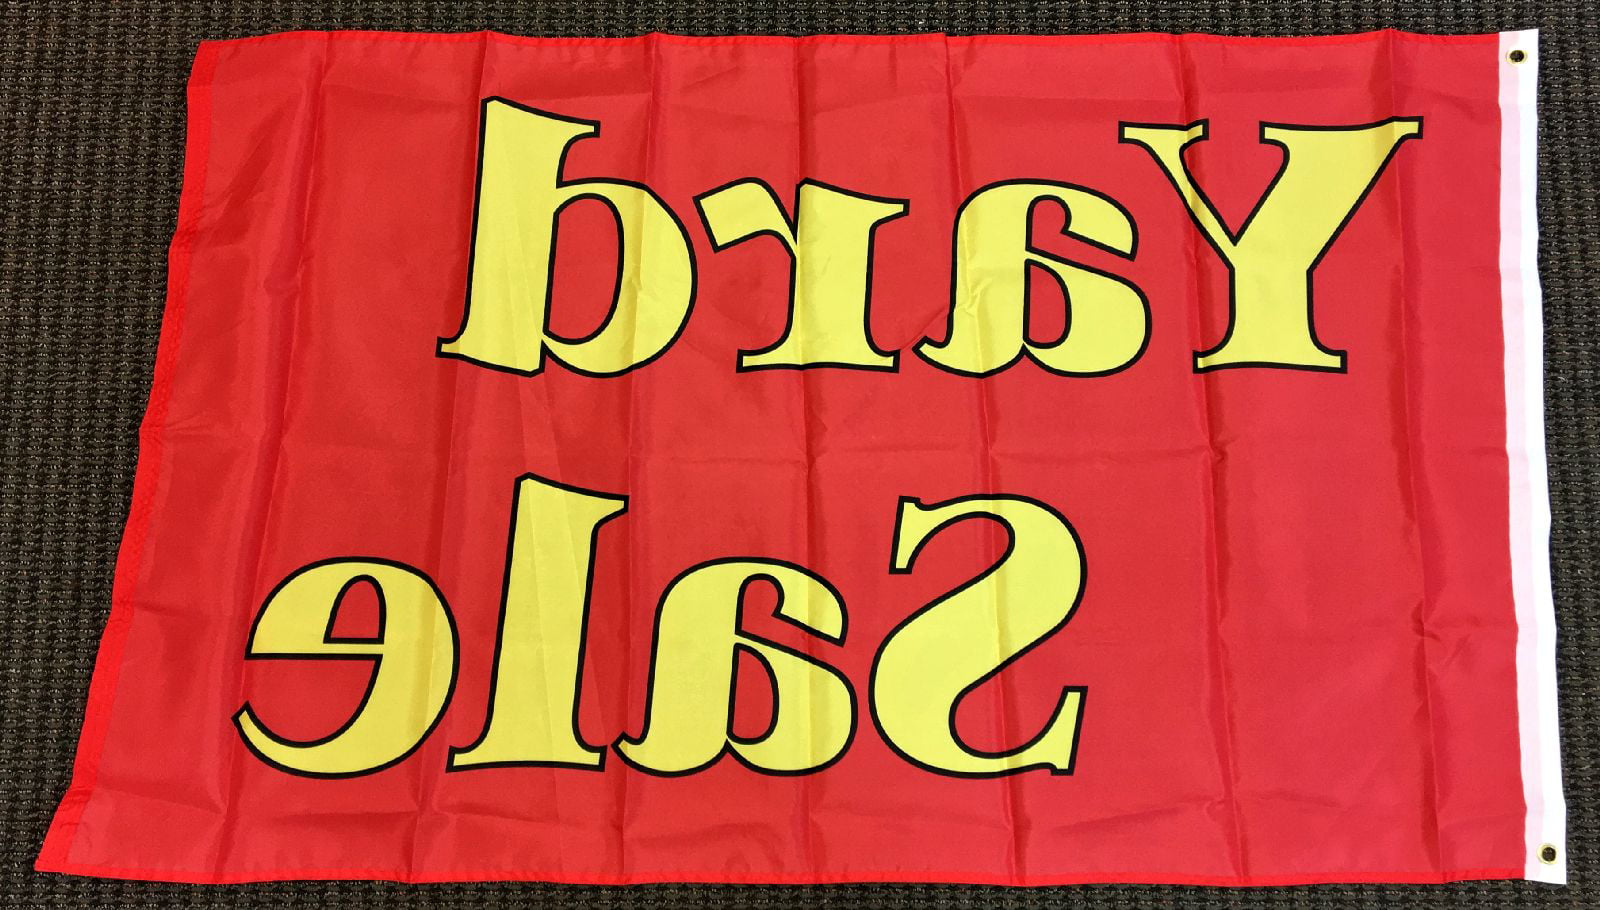 3x5 Yard Red and Yellow Flag Outdoor Business Sales Advertising Sign Banner for sale online